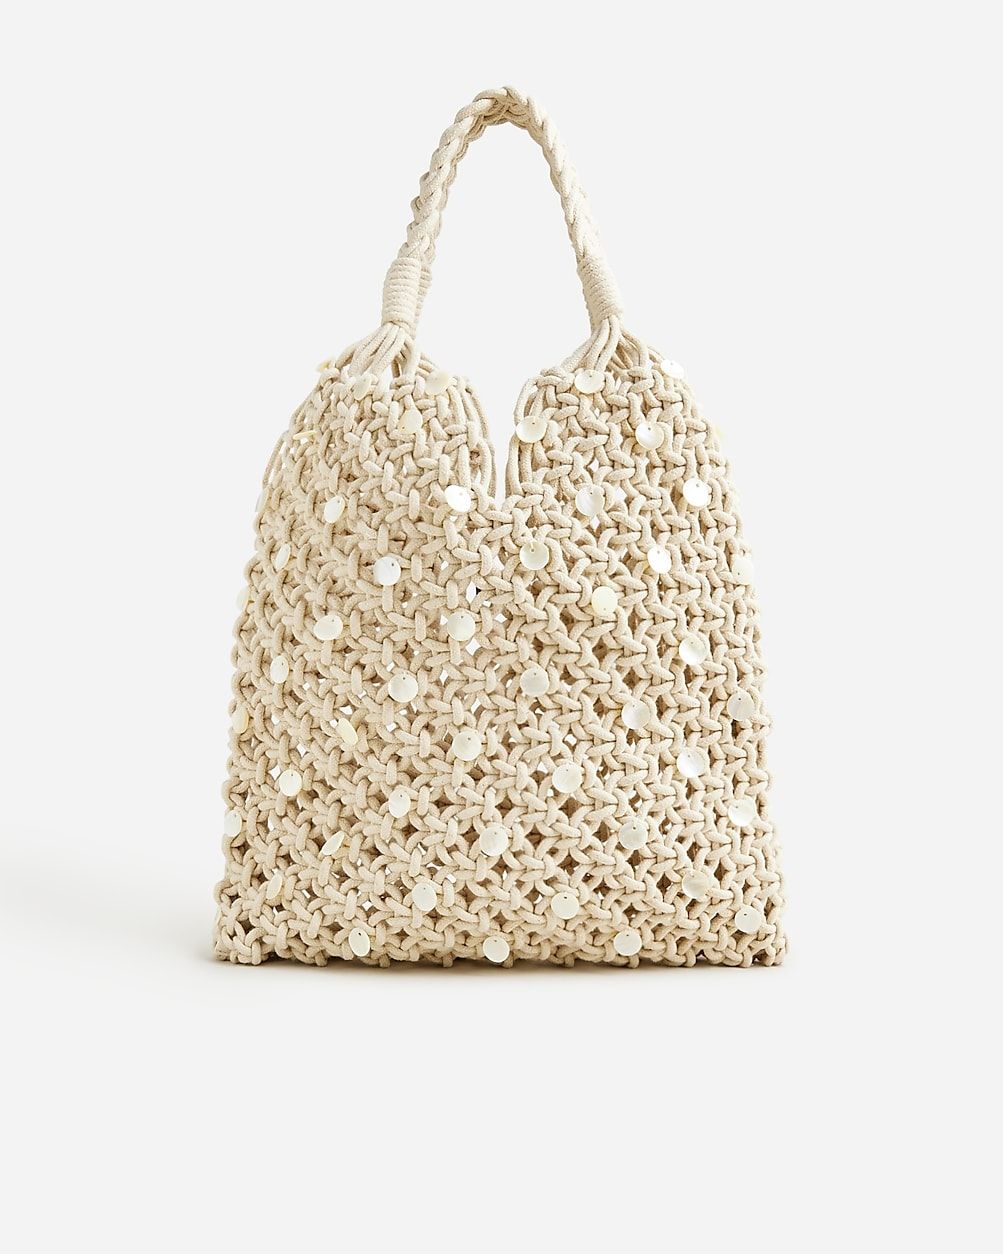 Cadiz hand-knotted rope tote with beads | J.Crew US